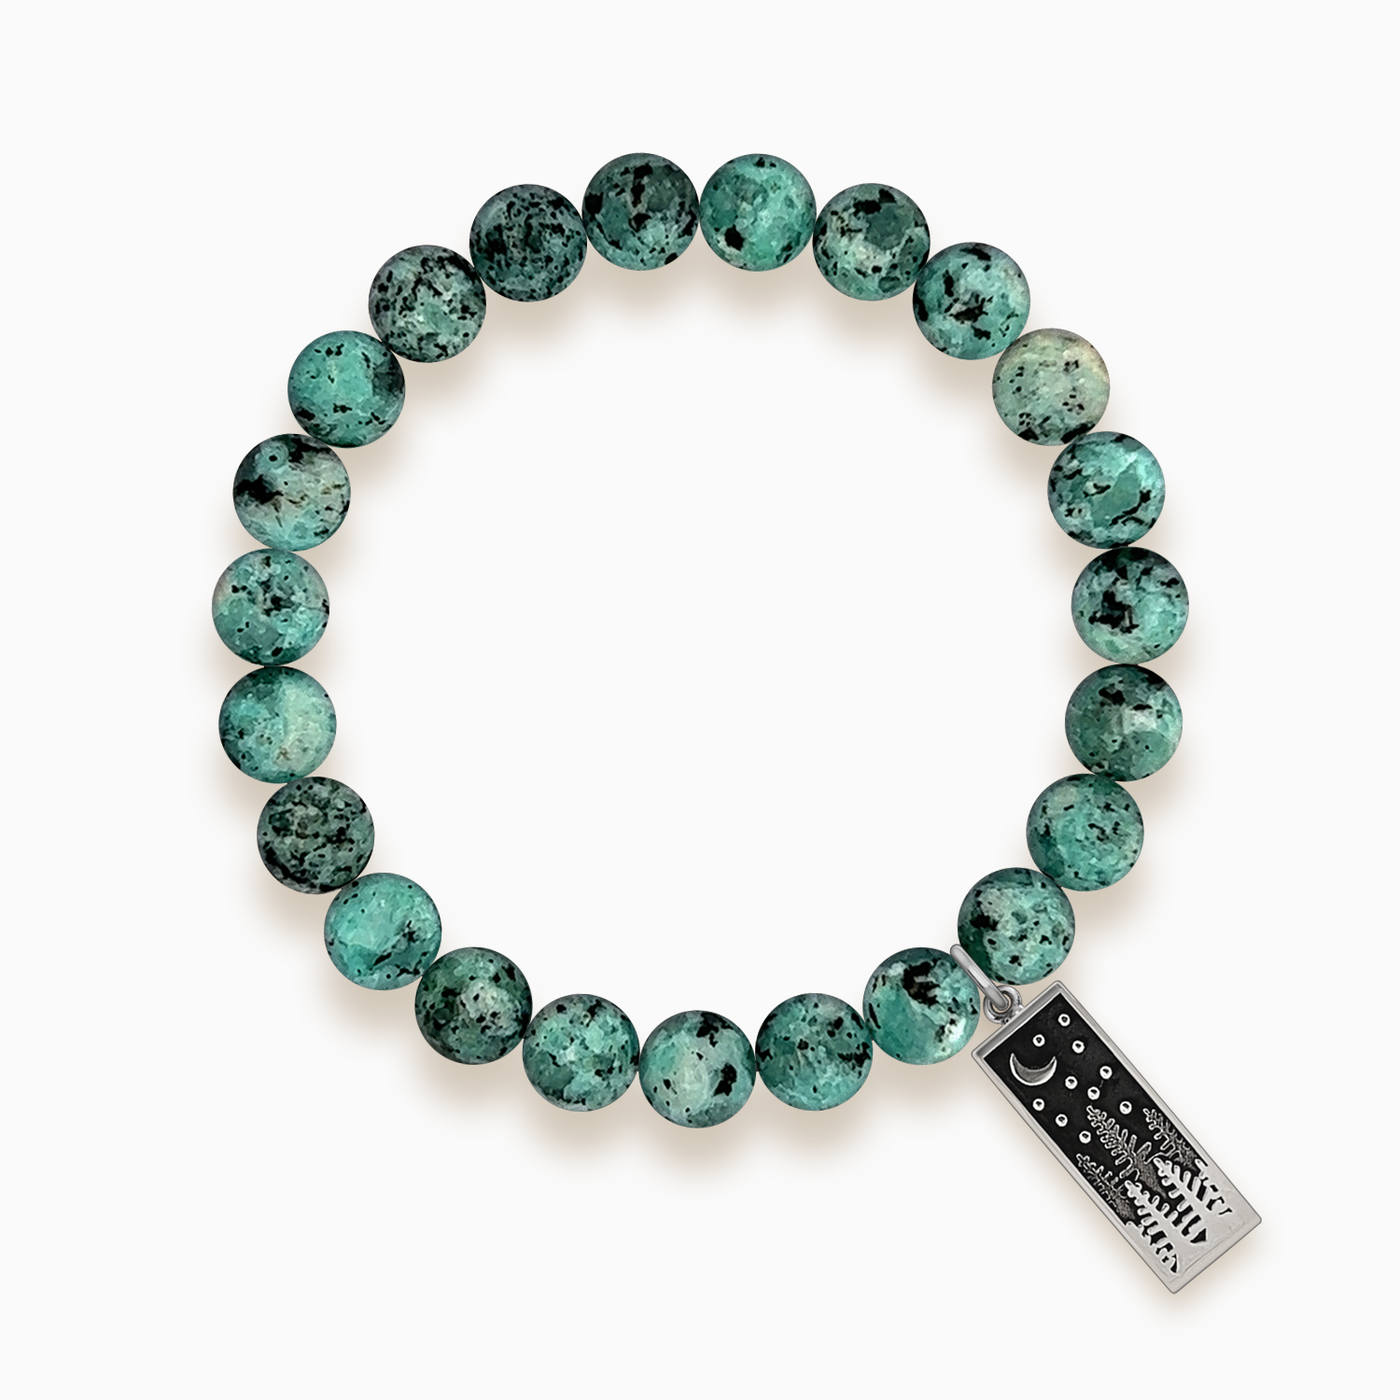 Gemstone Stacker Bracelet With Great Outdoors Charm